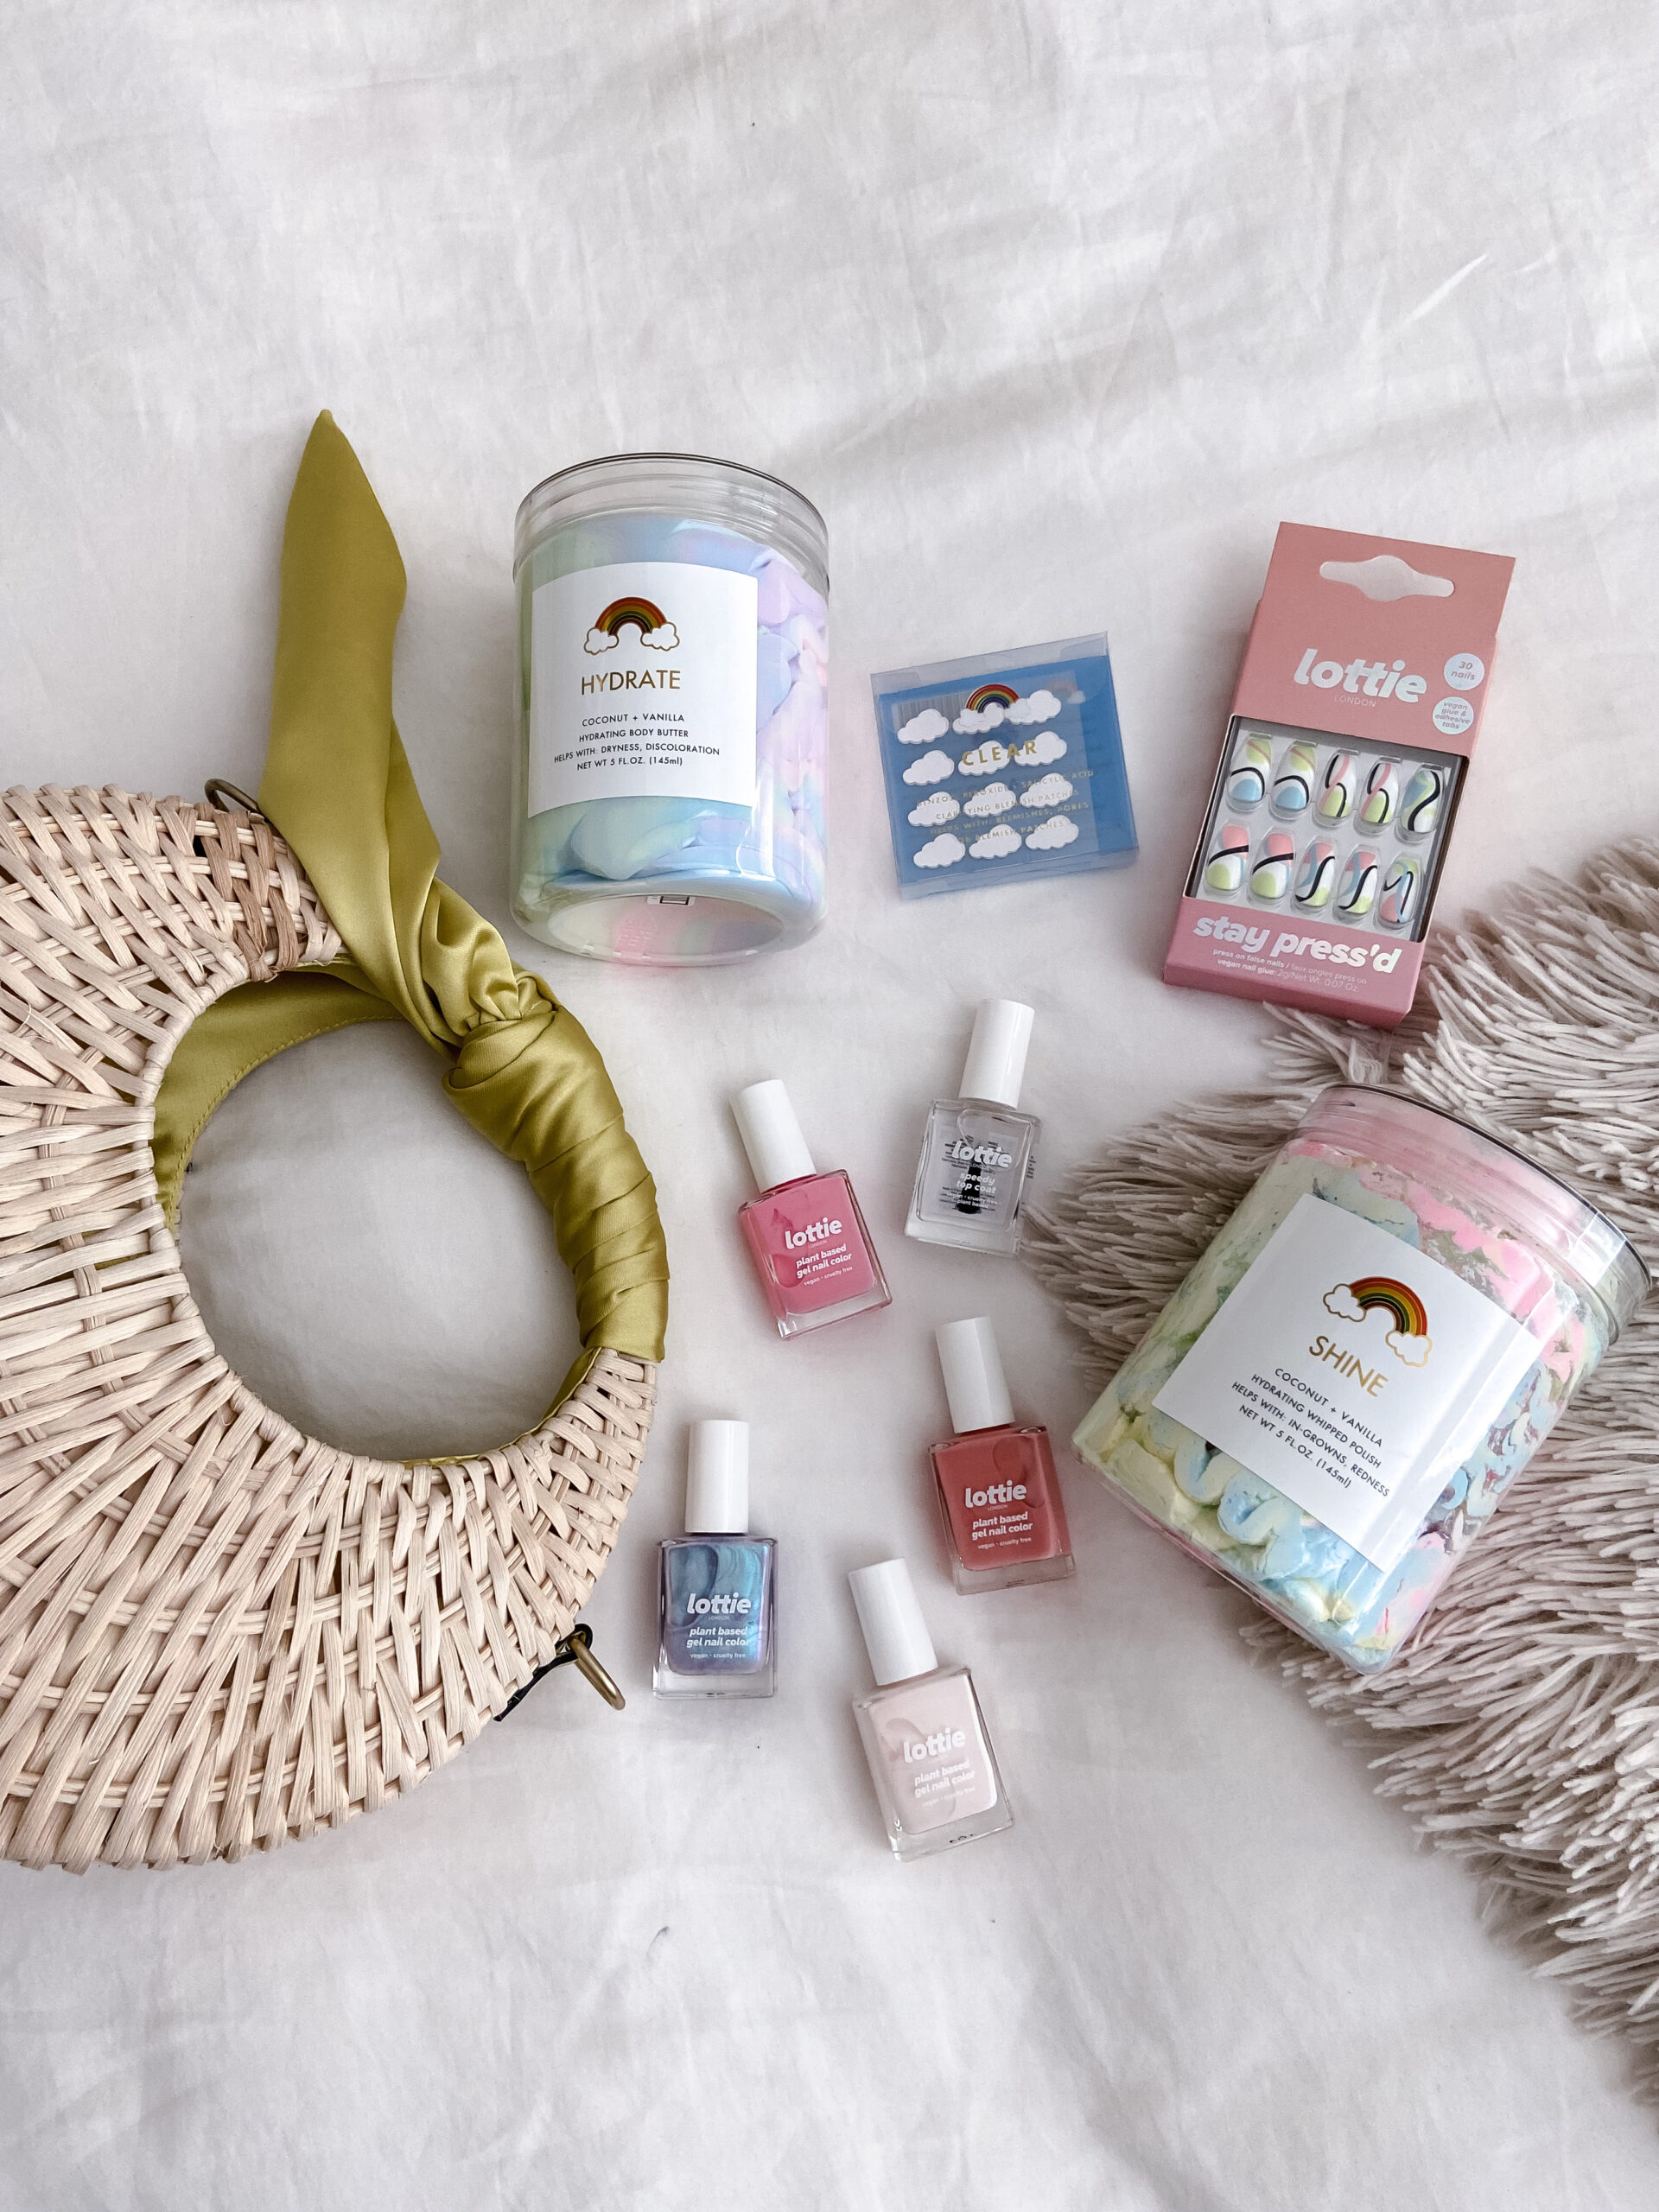 NEW WALMART BEAUTY FINDS-Jaclyn De Leon. Colorful brands discovered at Walmart. Lottie London has fun nail polish and press on nails. Rainbow beauty has a variety of face and body products that are colorful and clean. Perfect for summer.